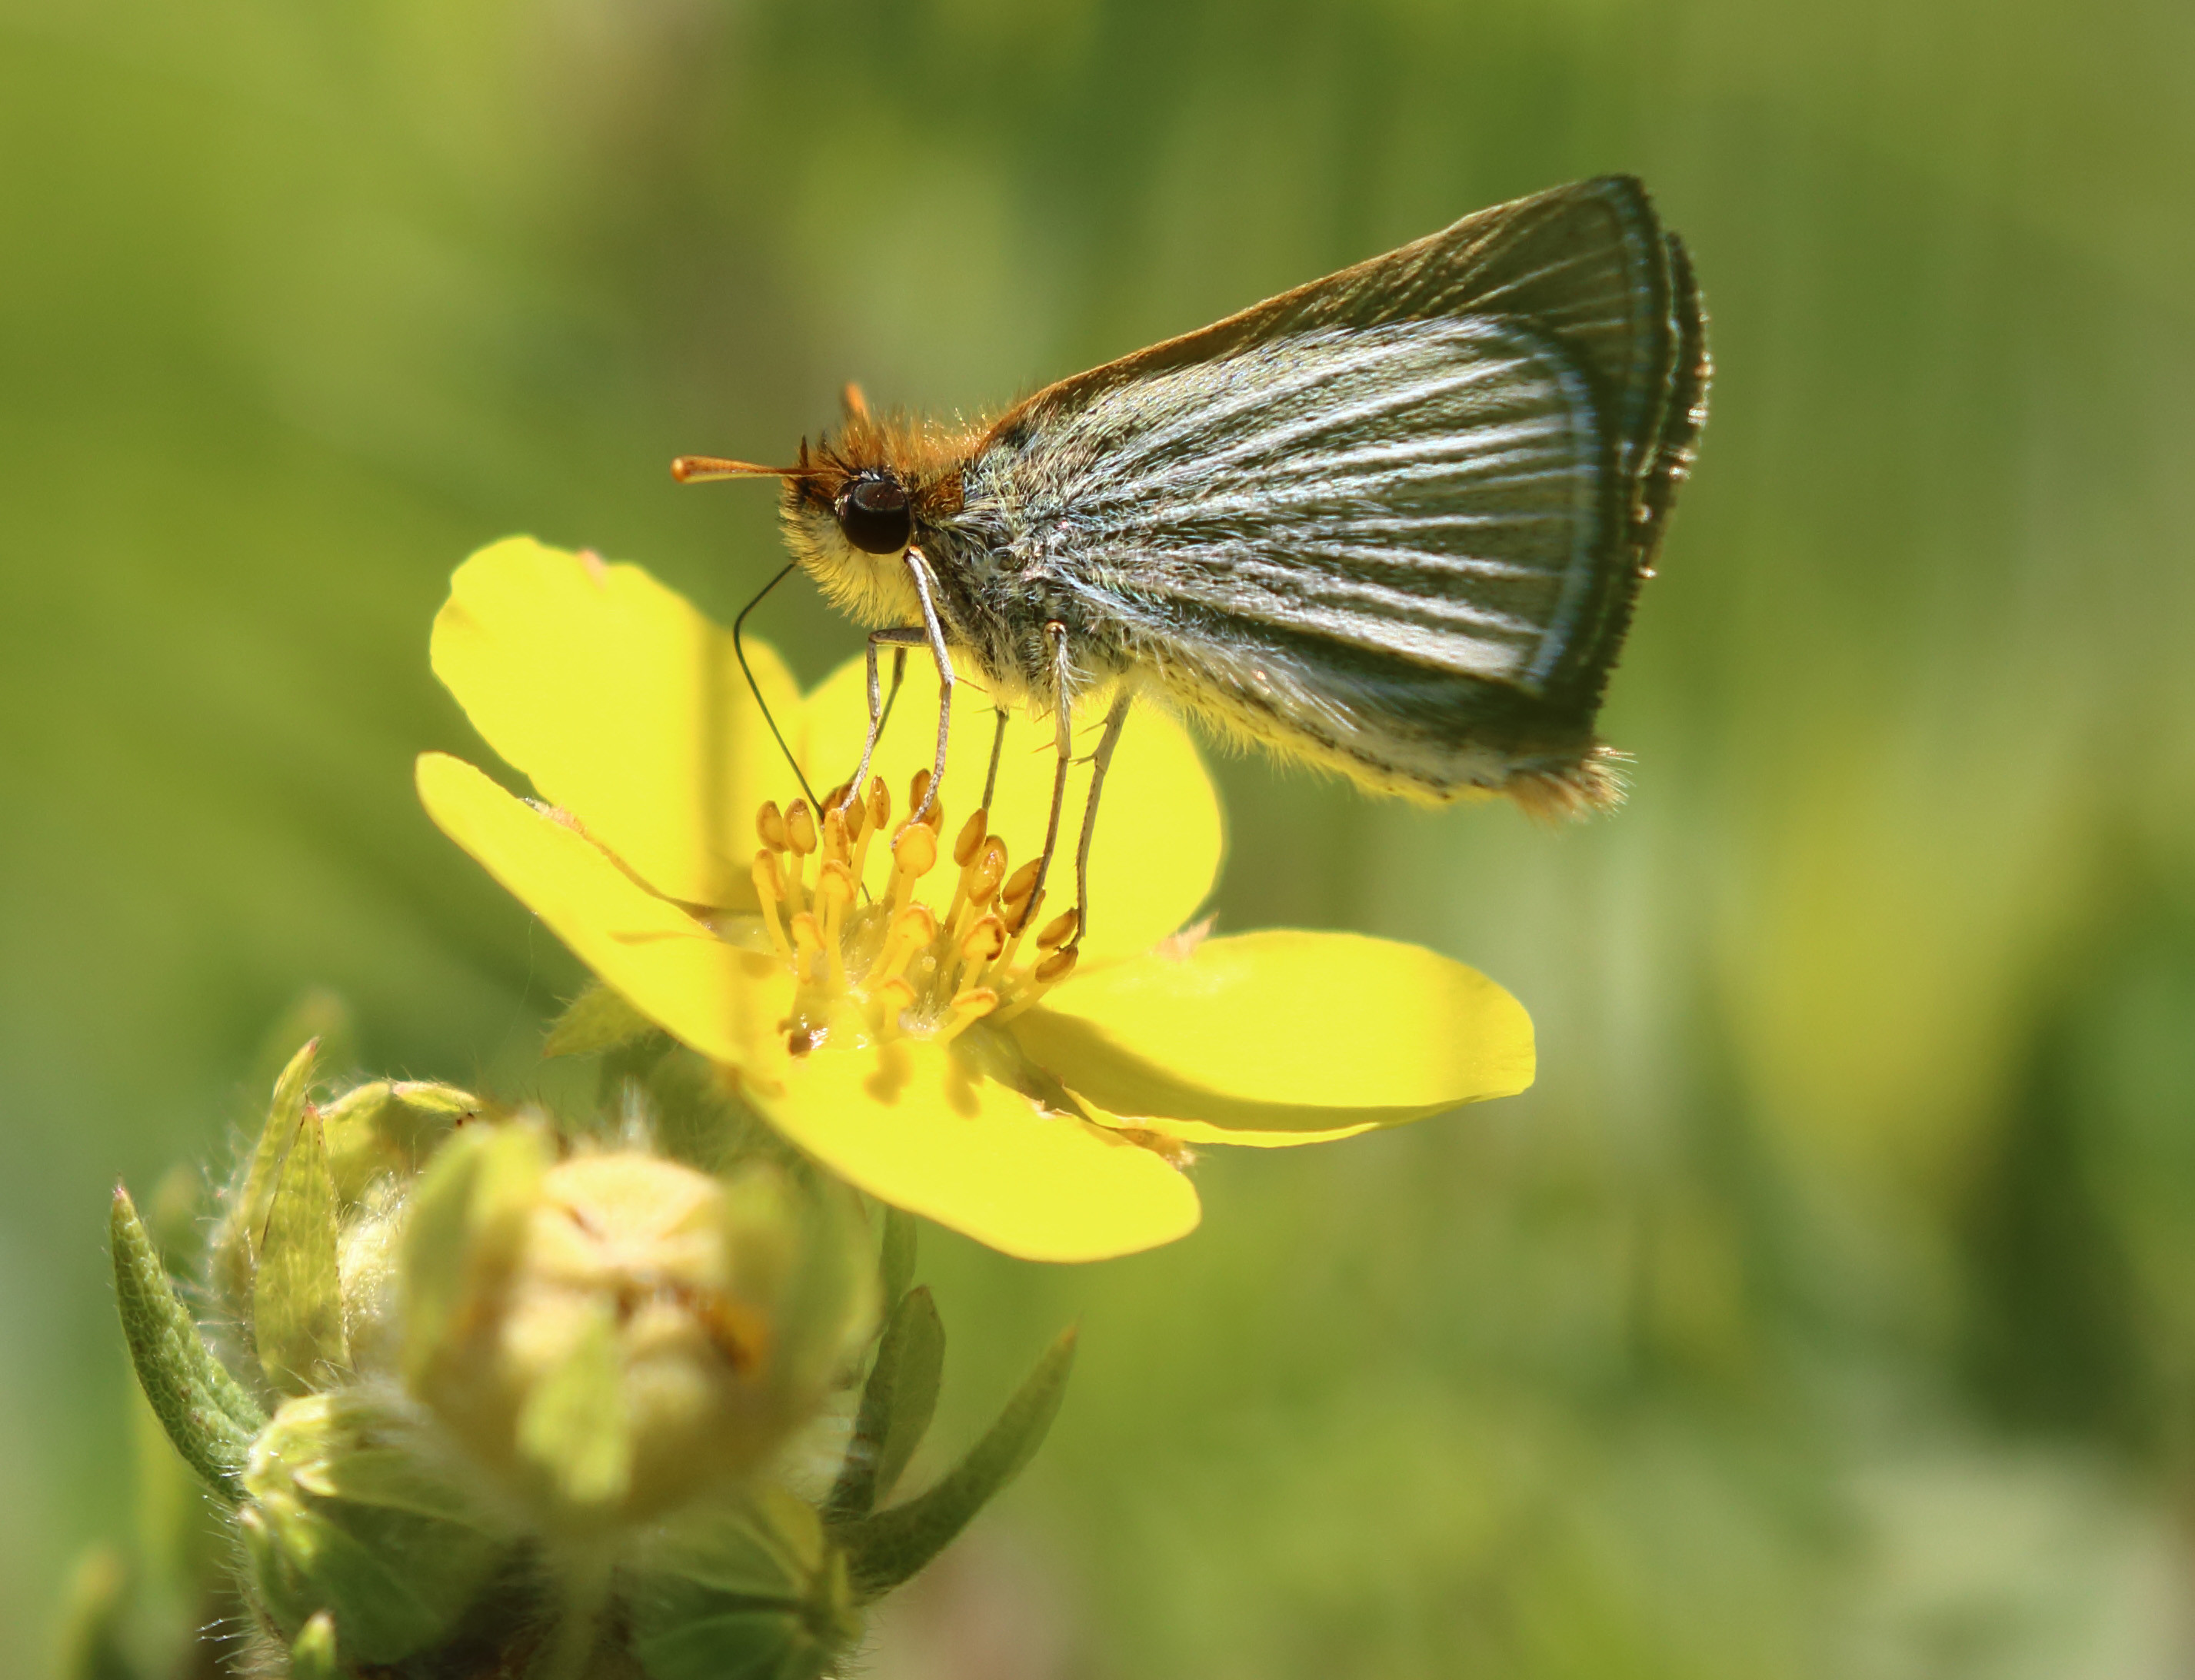 Poweshiek skipperling sipping nectar from a yellow flower